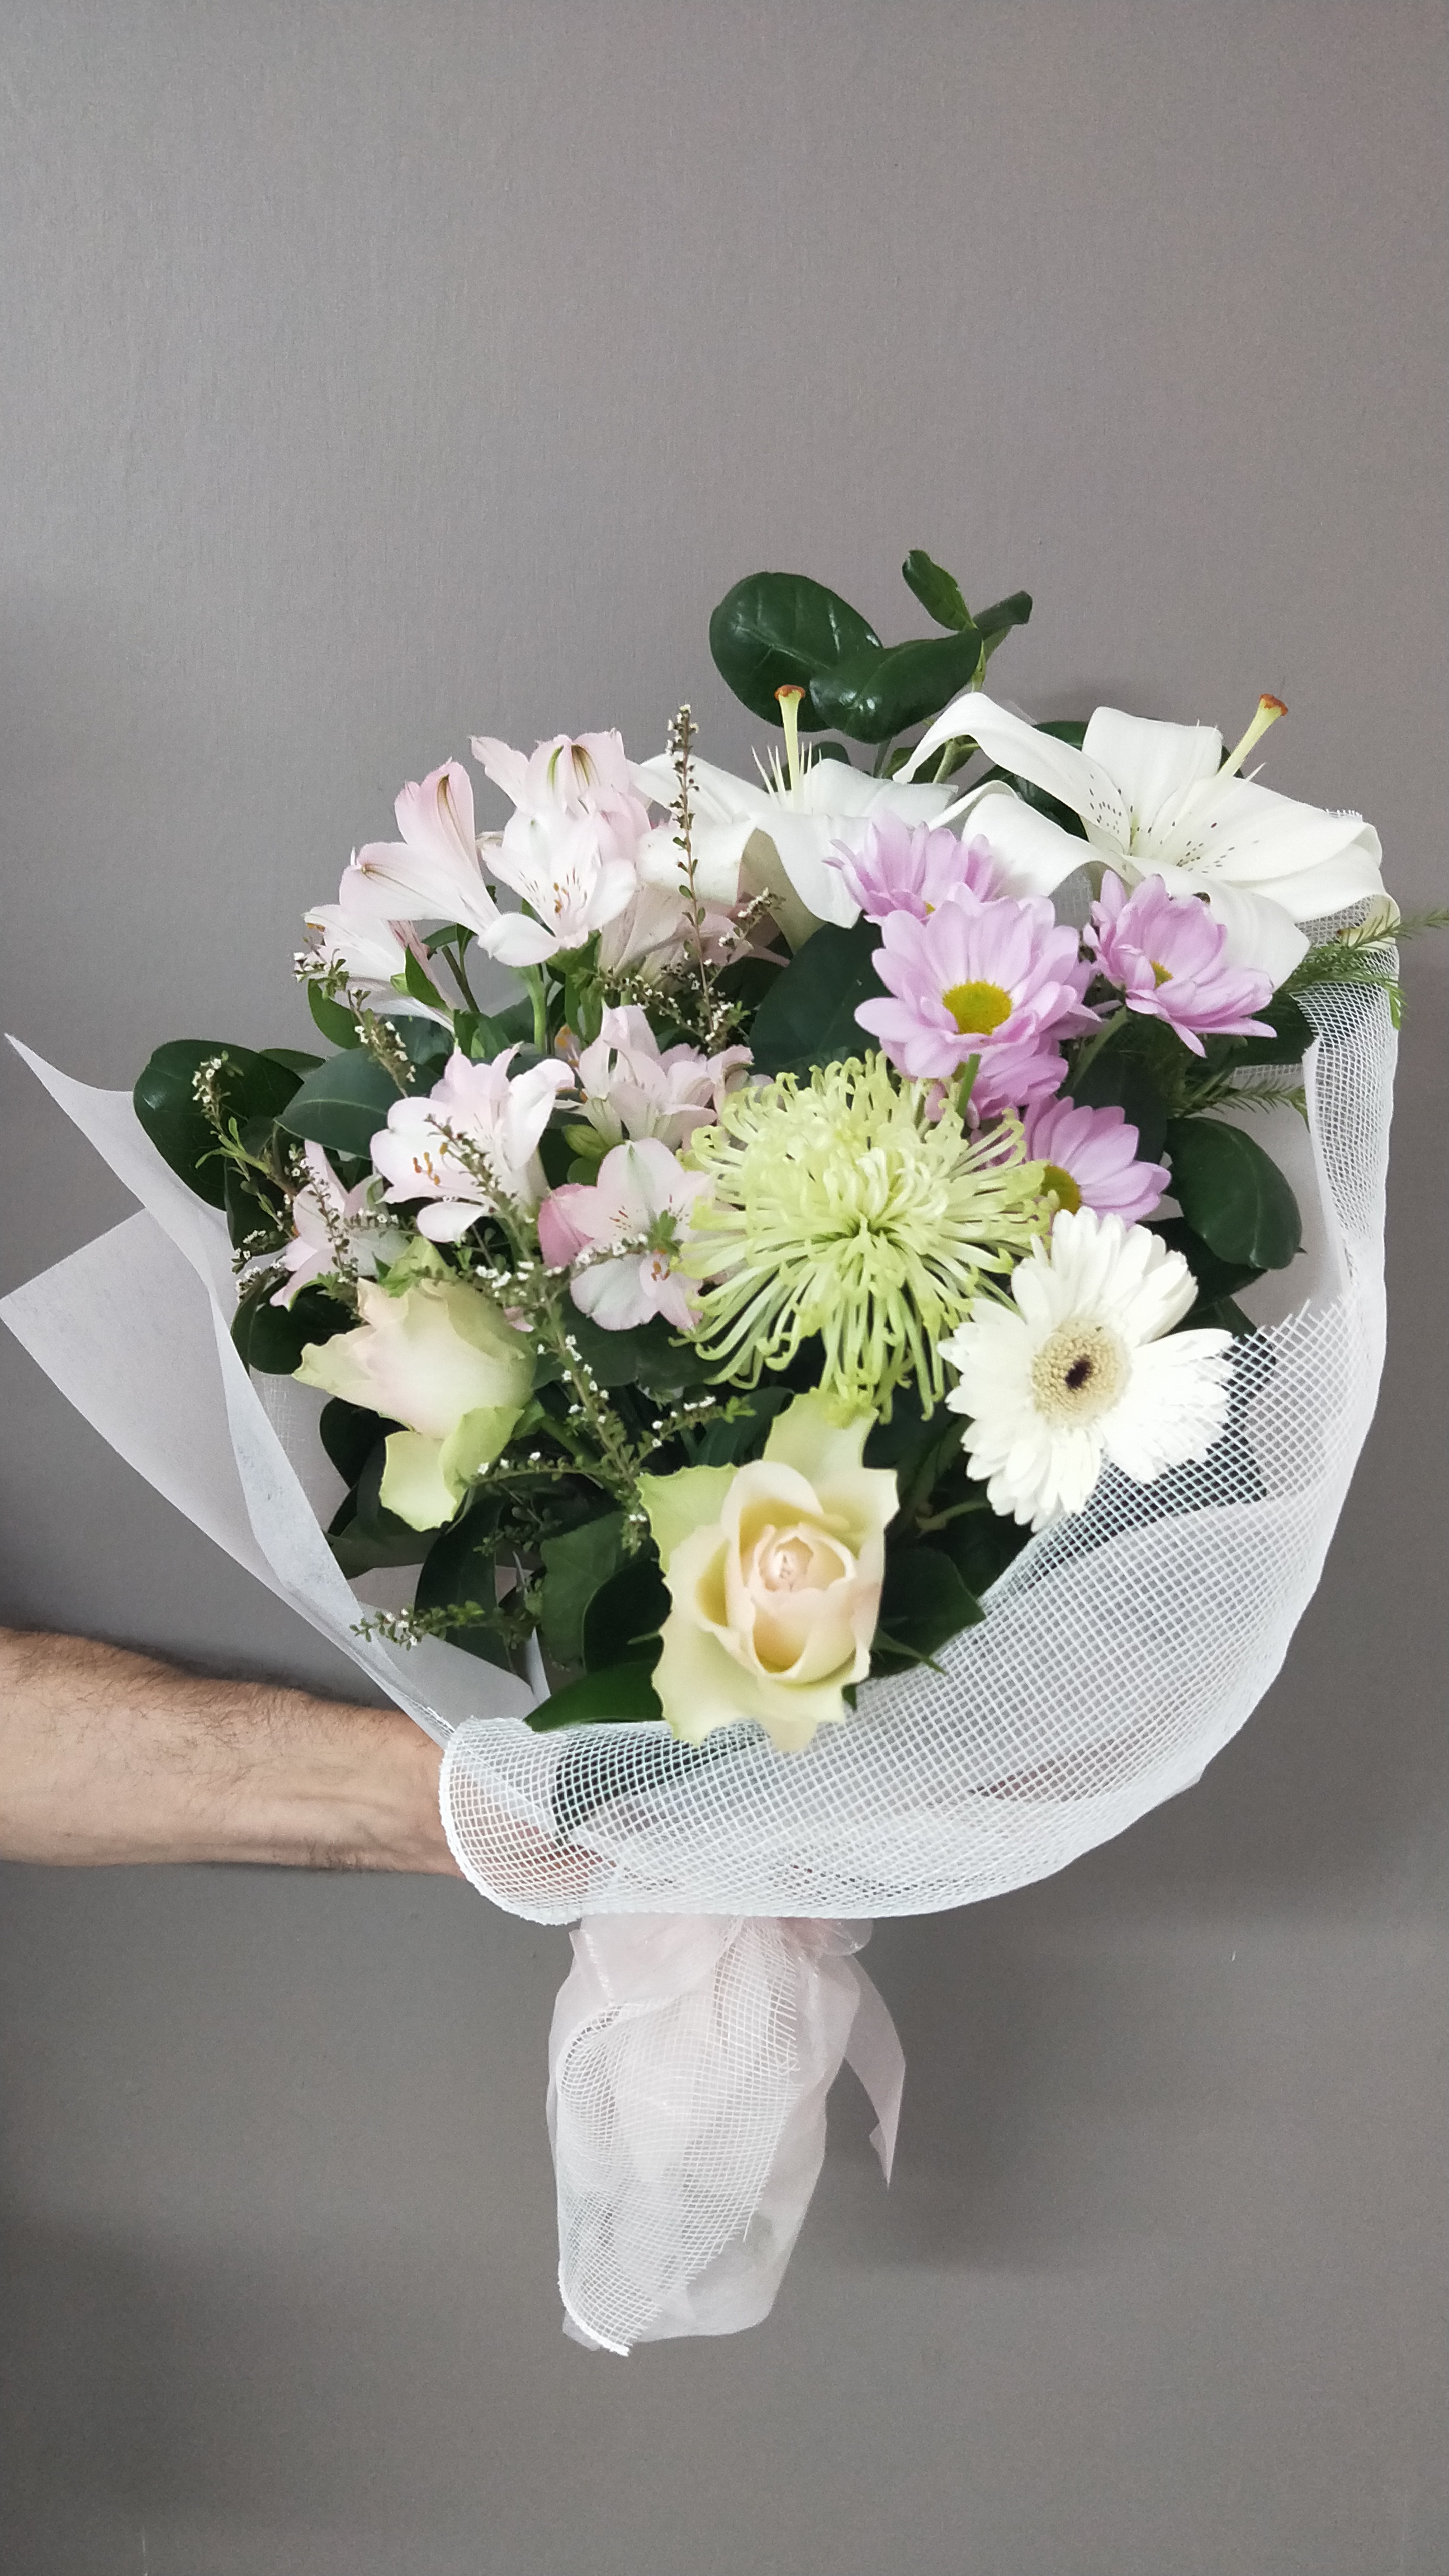 Harmony bouquet make a perfect gift for any occasion.